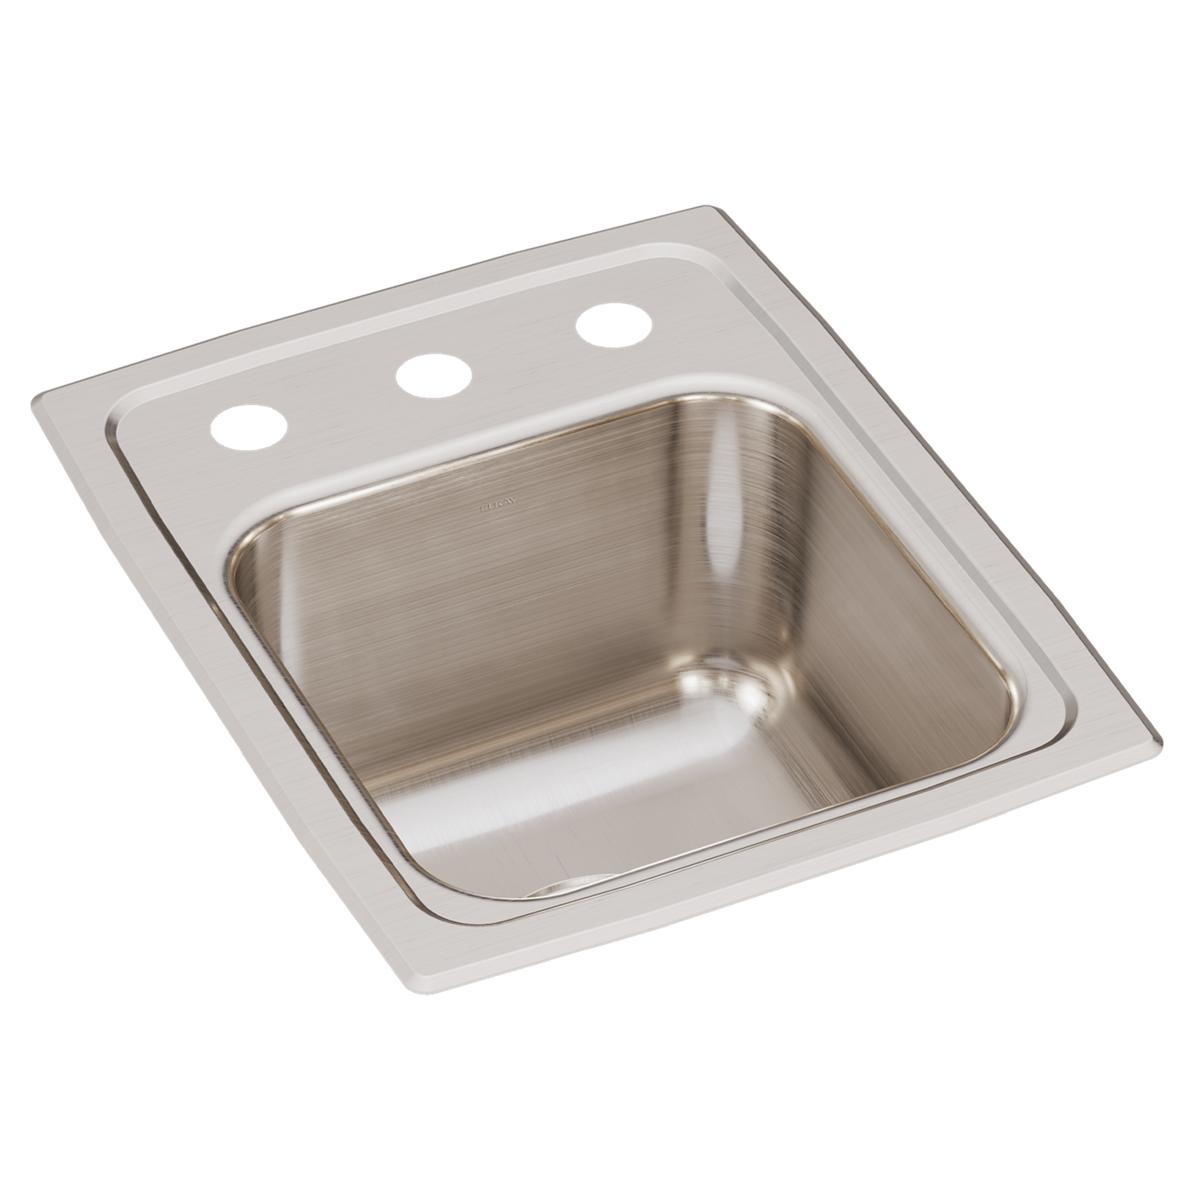 Elkay Lustertone Classic 13" x 16" x 7-5/8" Single Bowl Drop-in Sink with Quick-clip